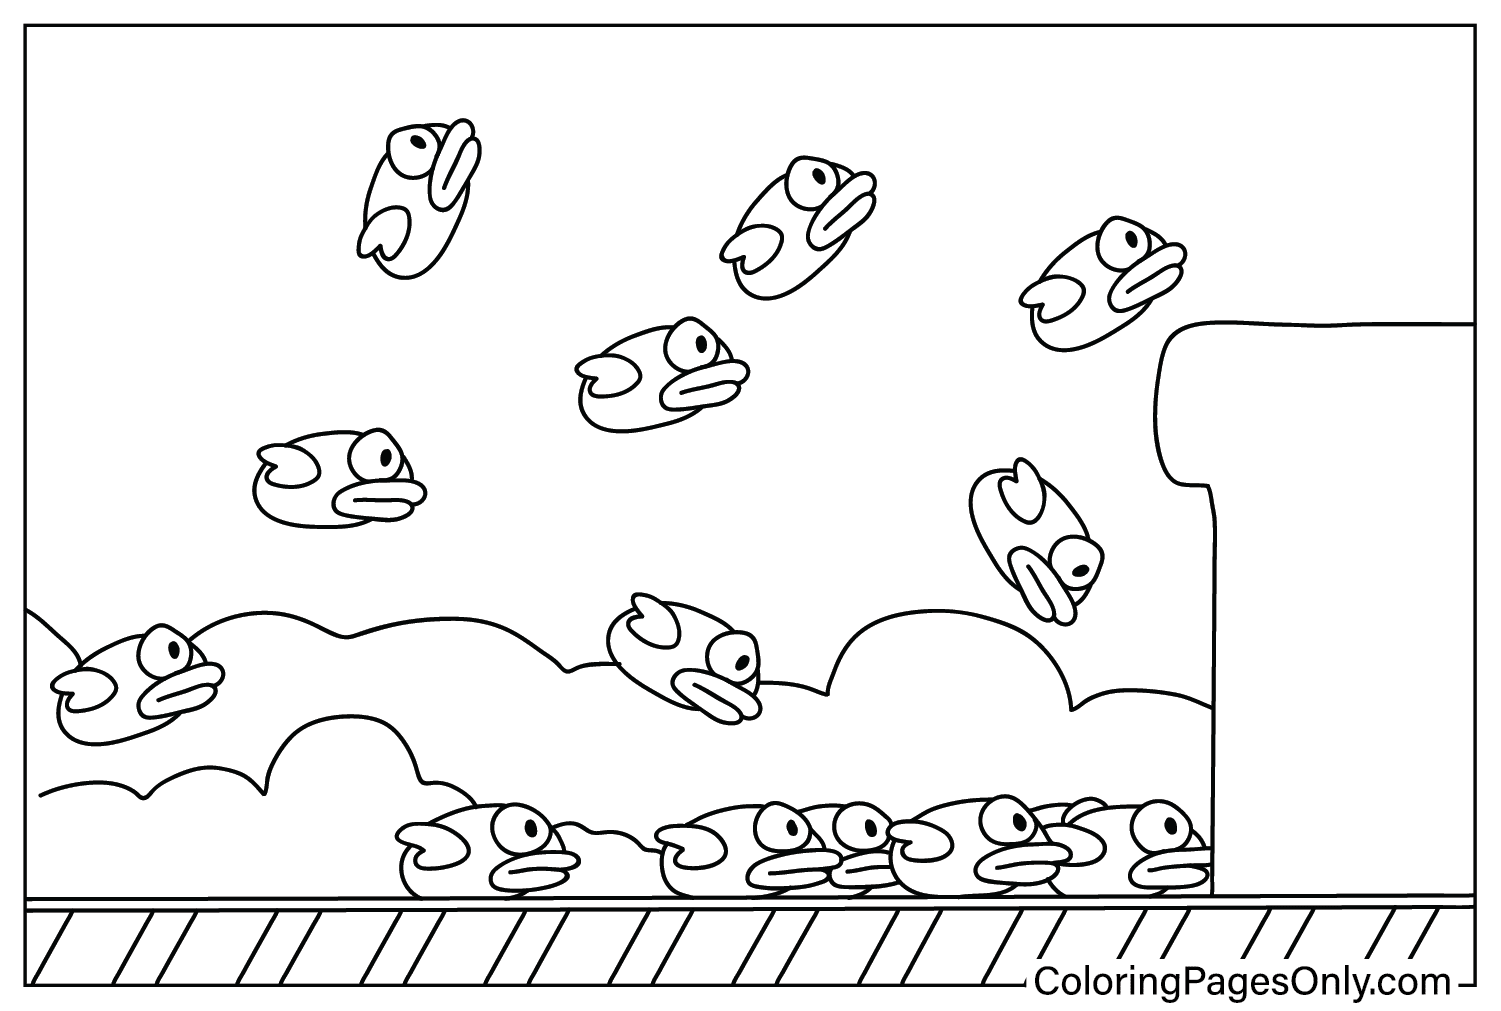 Coloring Page Flappy Bird from Flappy Bird